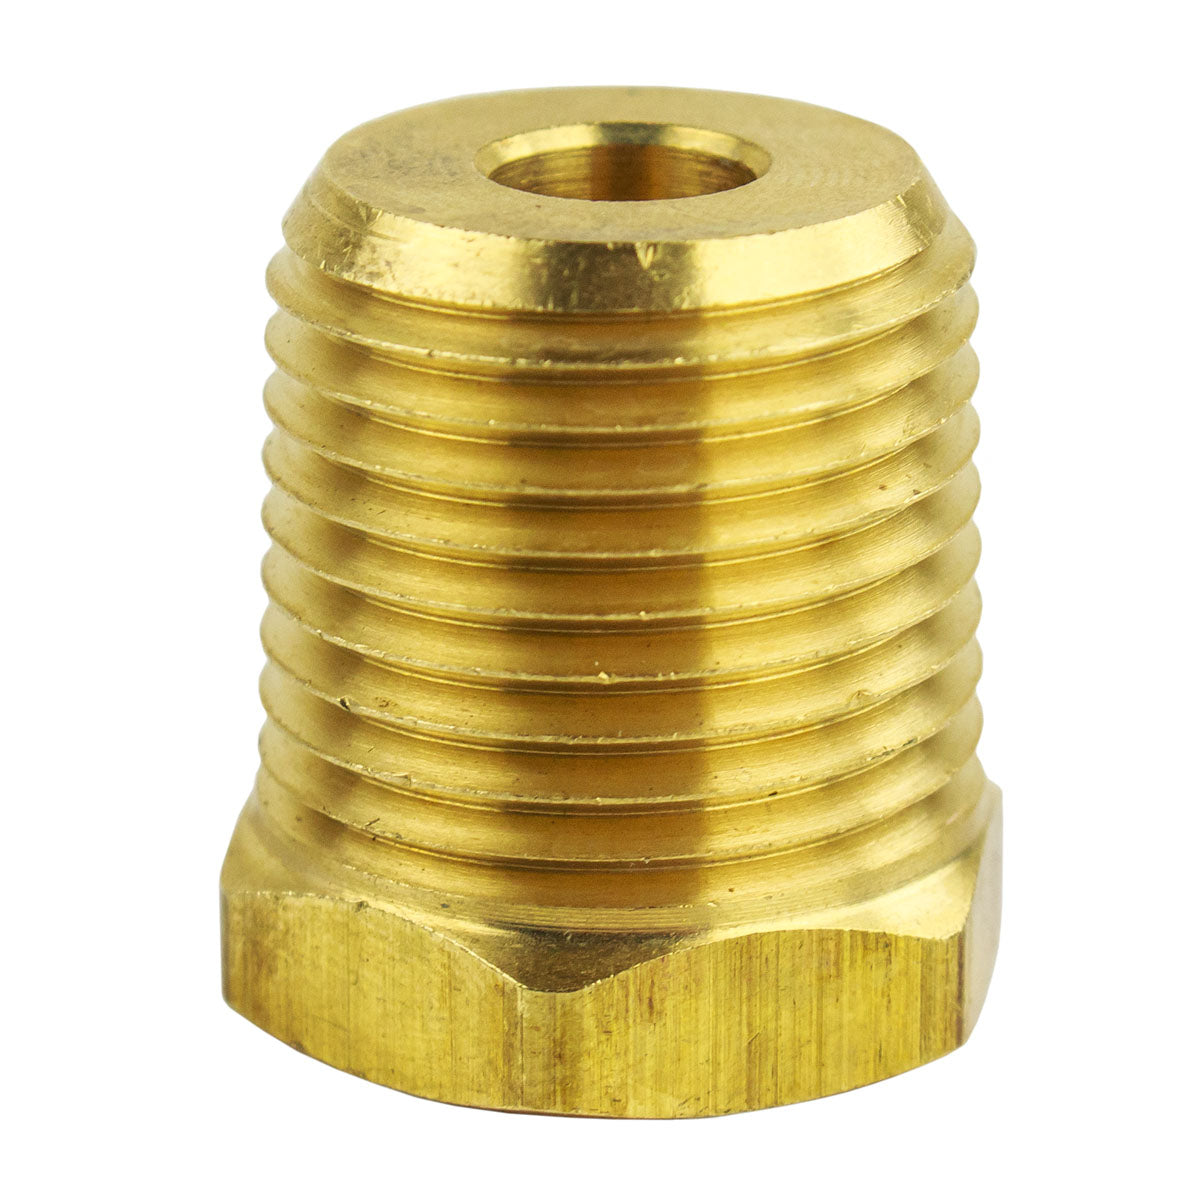 1/2" MNPT x 1/4" FNPT Solid Brass Bushings Reducer Fitting Adapter 28106 10-Pack